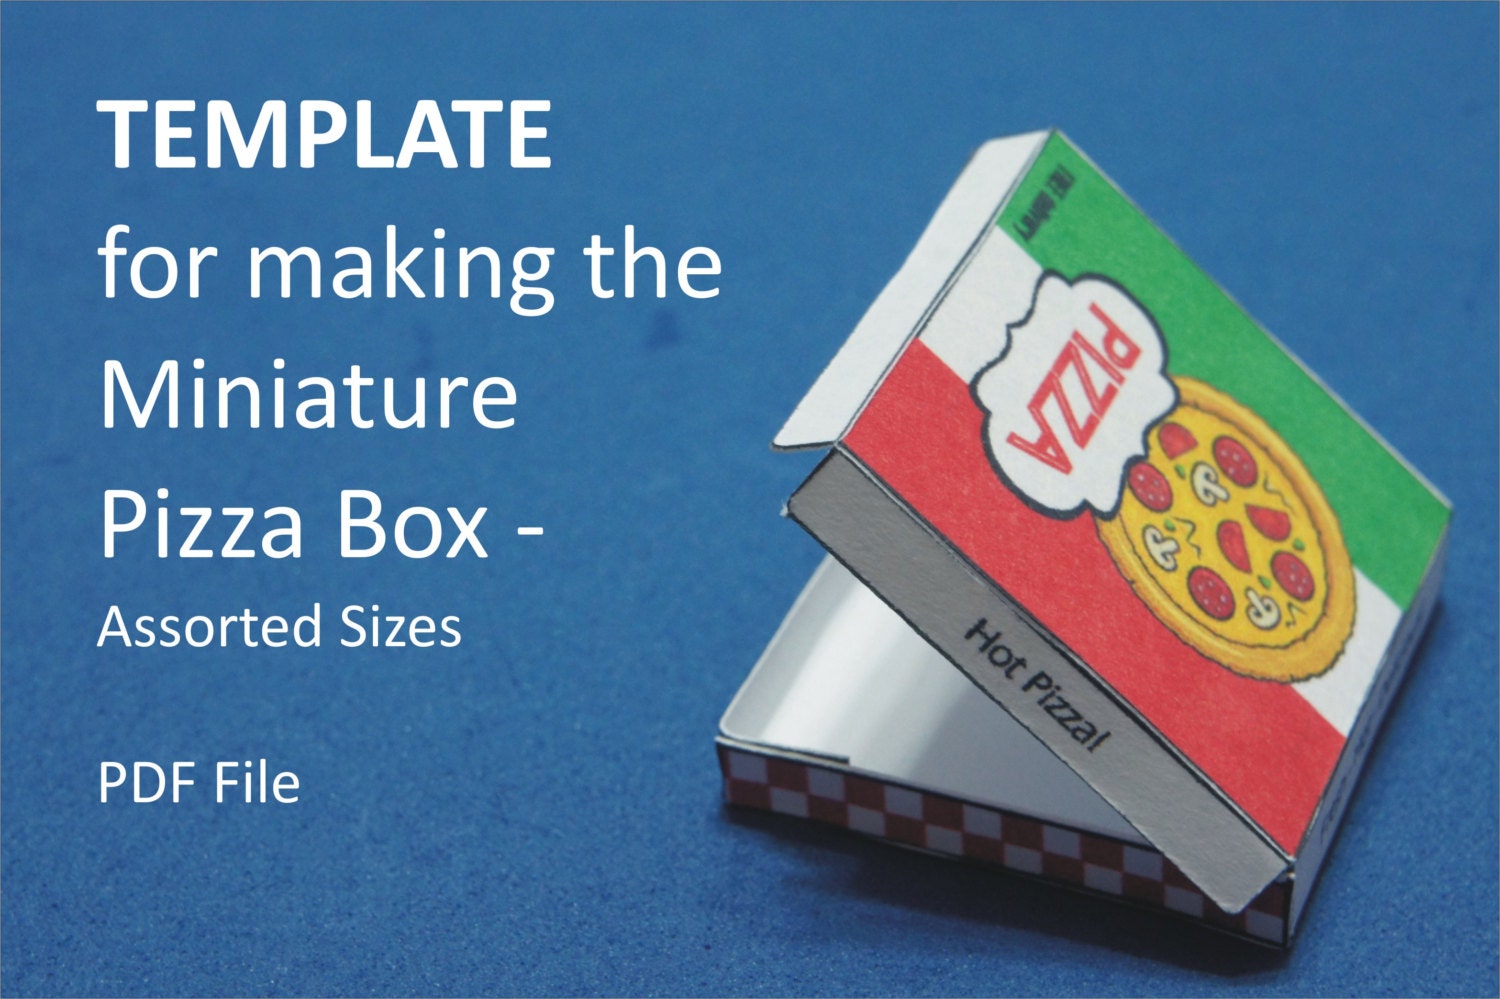 template-for-making-the-miniature-pizza-box-by-museumrockshop